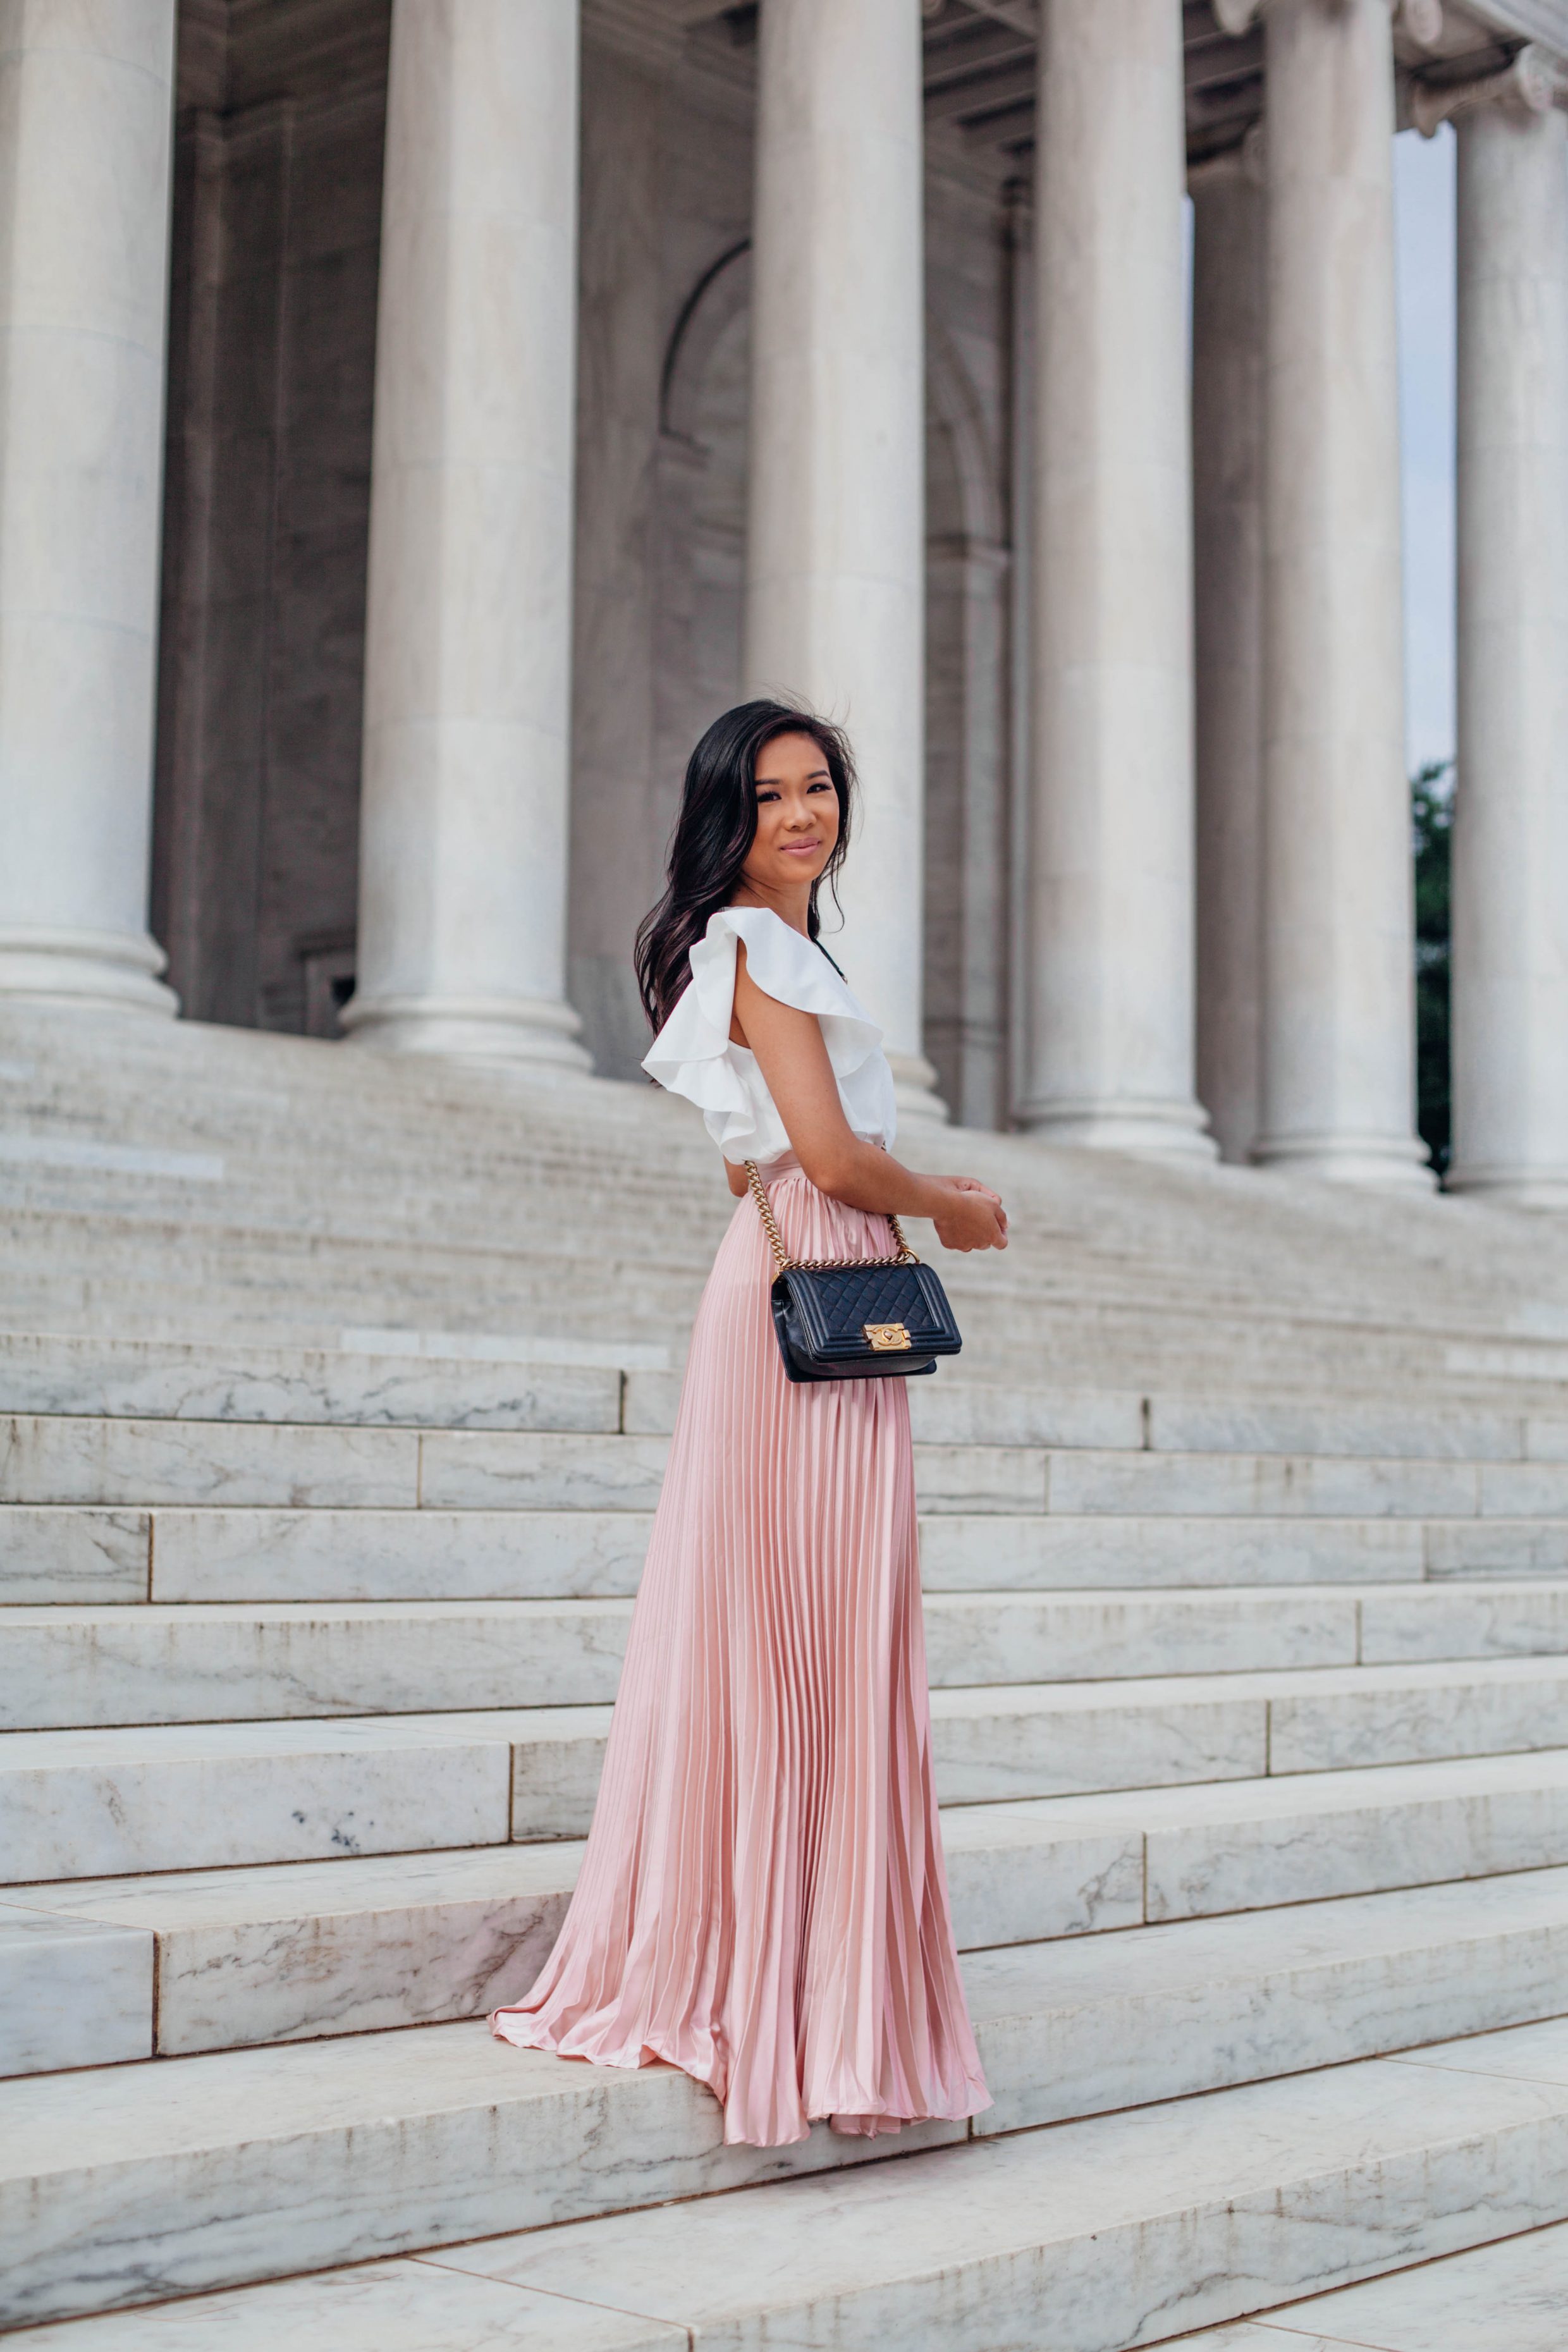 Pink Pleated Maxi Skirt at Jefferson Memorial | A weekend in Washington, D.C. | Travel and Food Guide